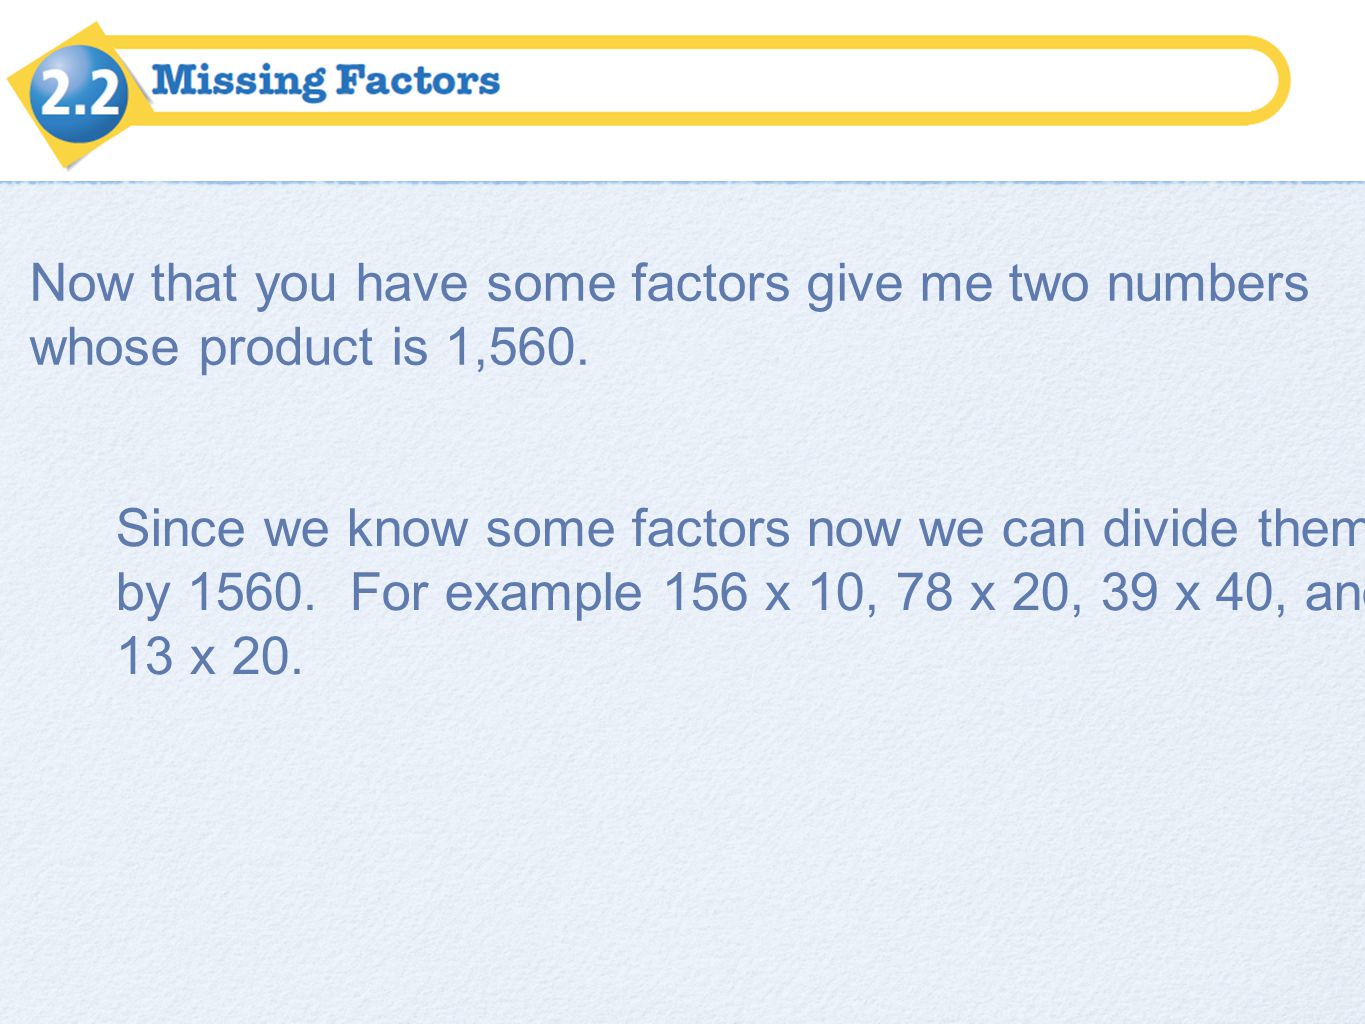 Now that you have some factors give me two numbers whose product is 1,560.